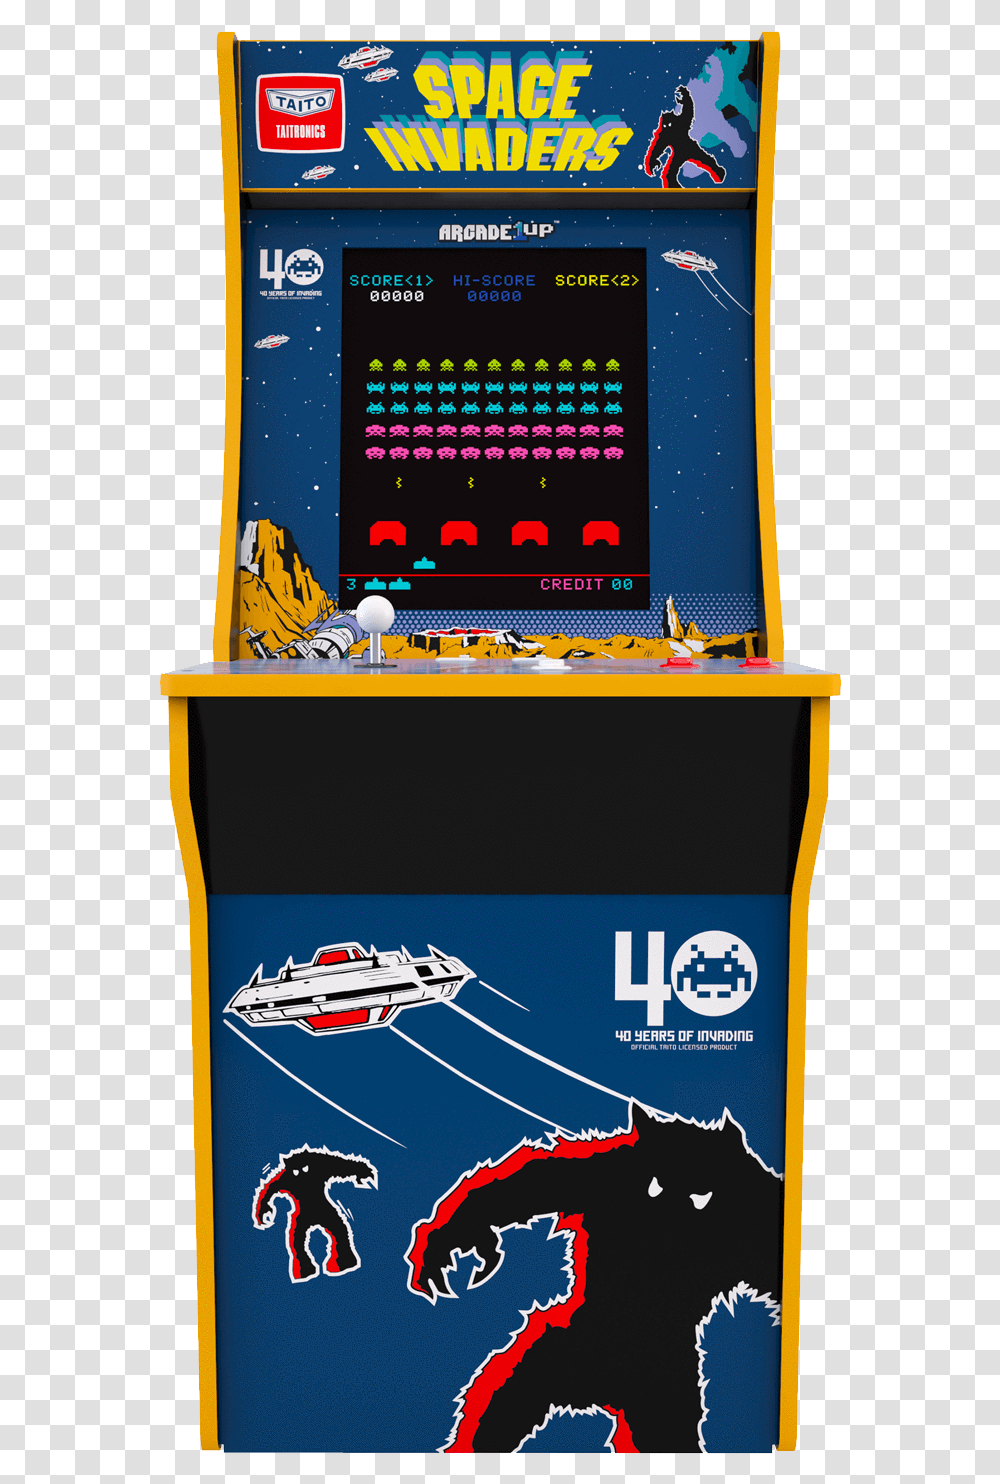 Space Invaders Arcade Cabinet Arcade1up Space Invaders Arcade Machine, Arcade Game Machine, Airplane, Aircraft, Vehicle Transparent Png